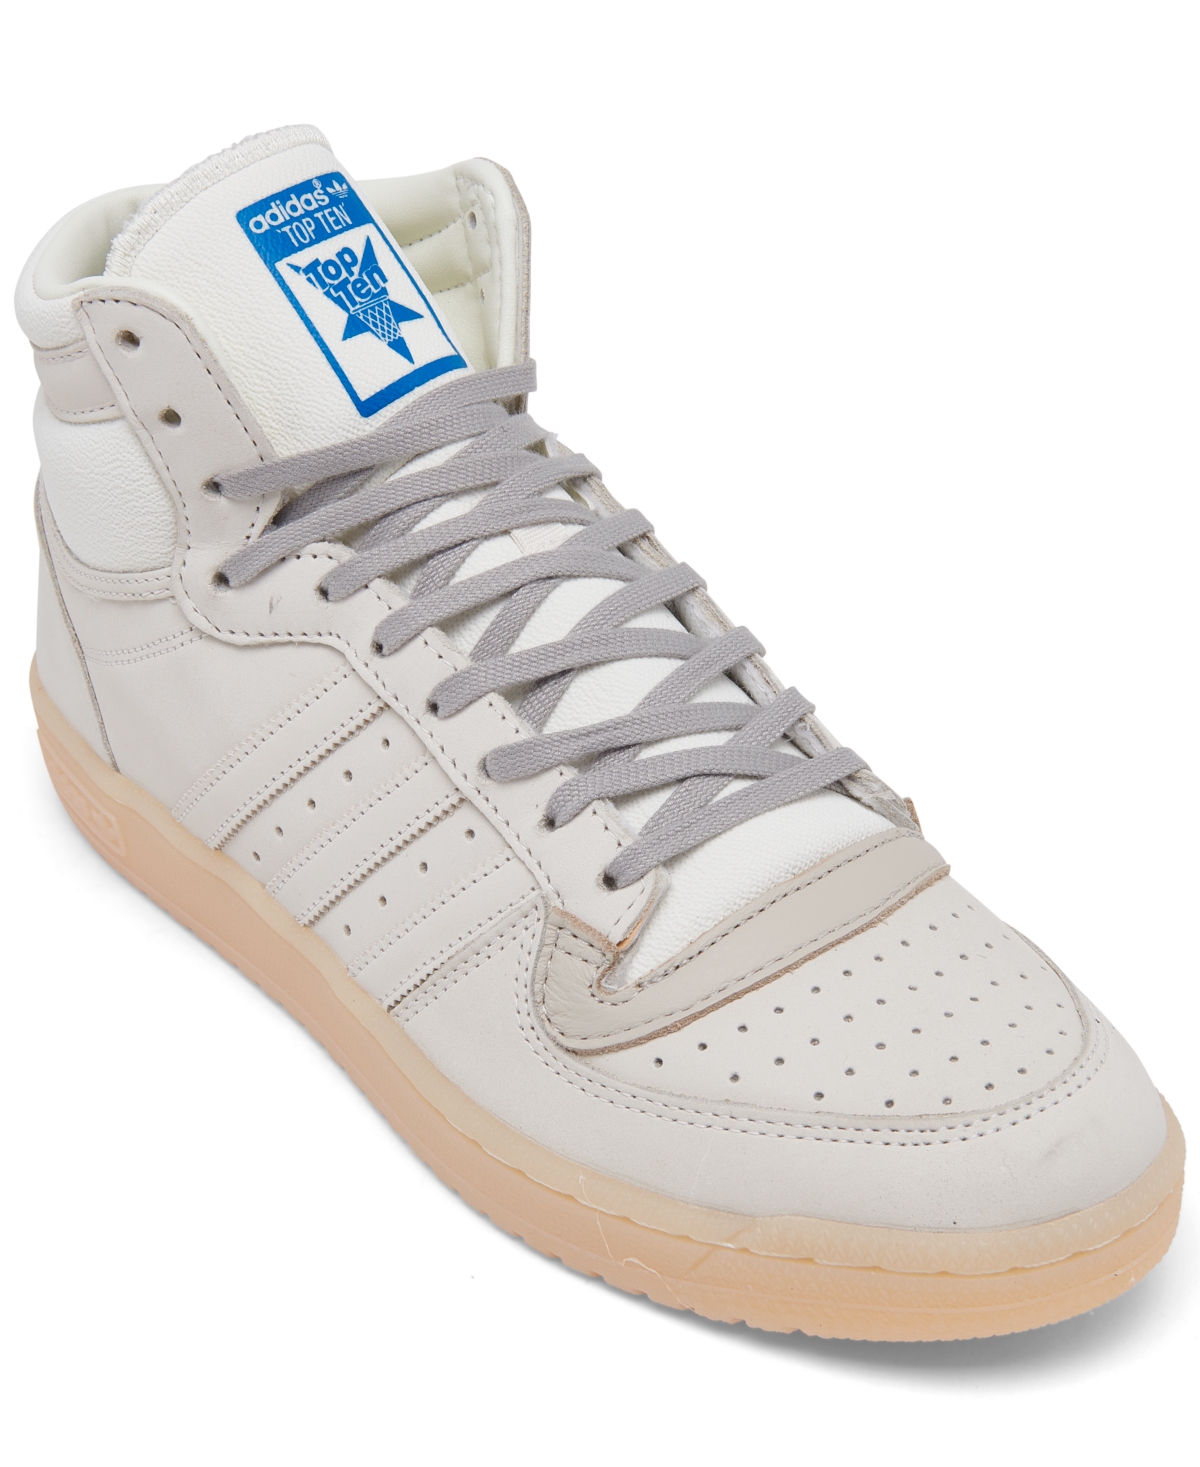 Adidas Originals Adidas Men's Top Ten Rb Casual Sneakers From Finish Line In Off White/ses